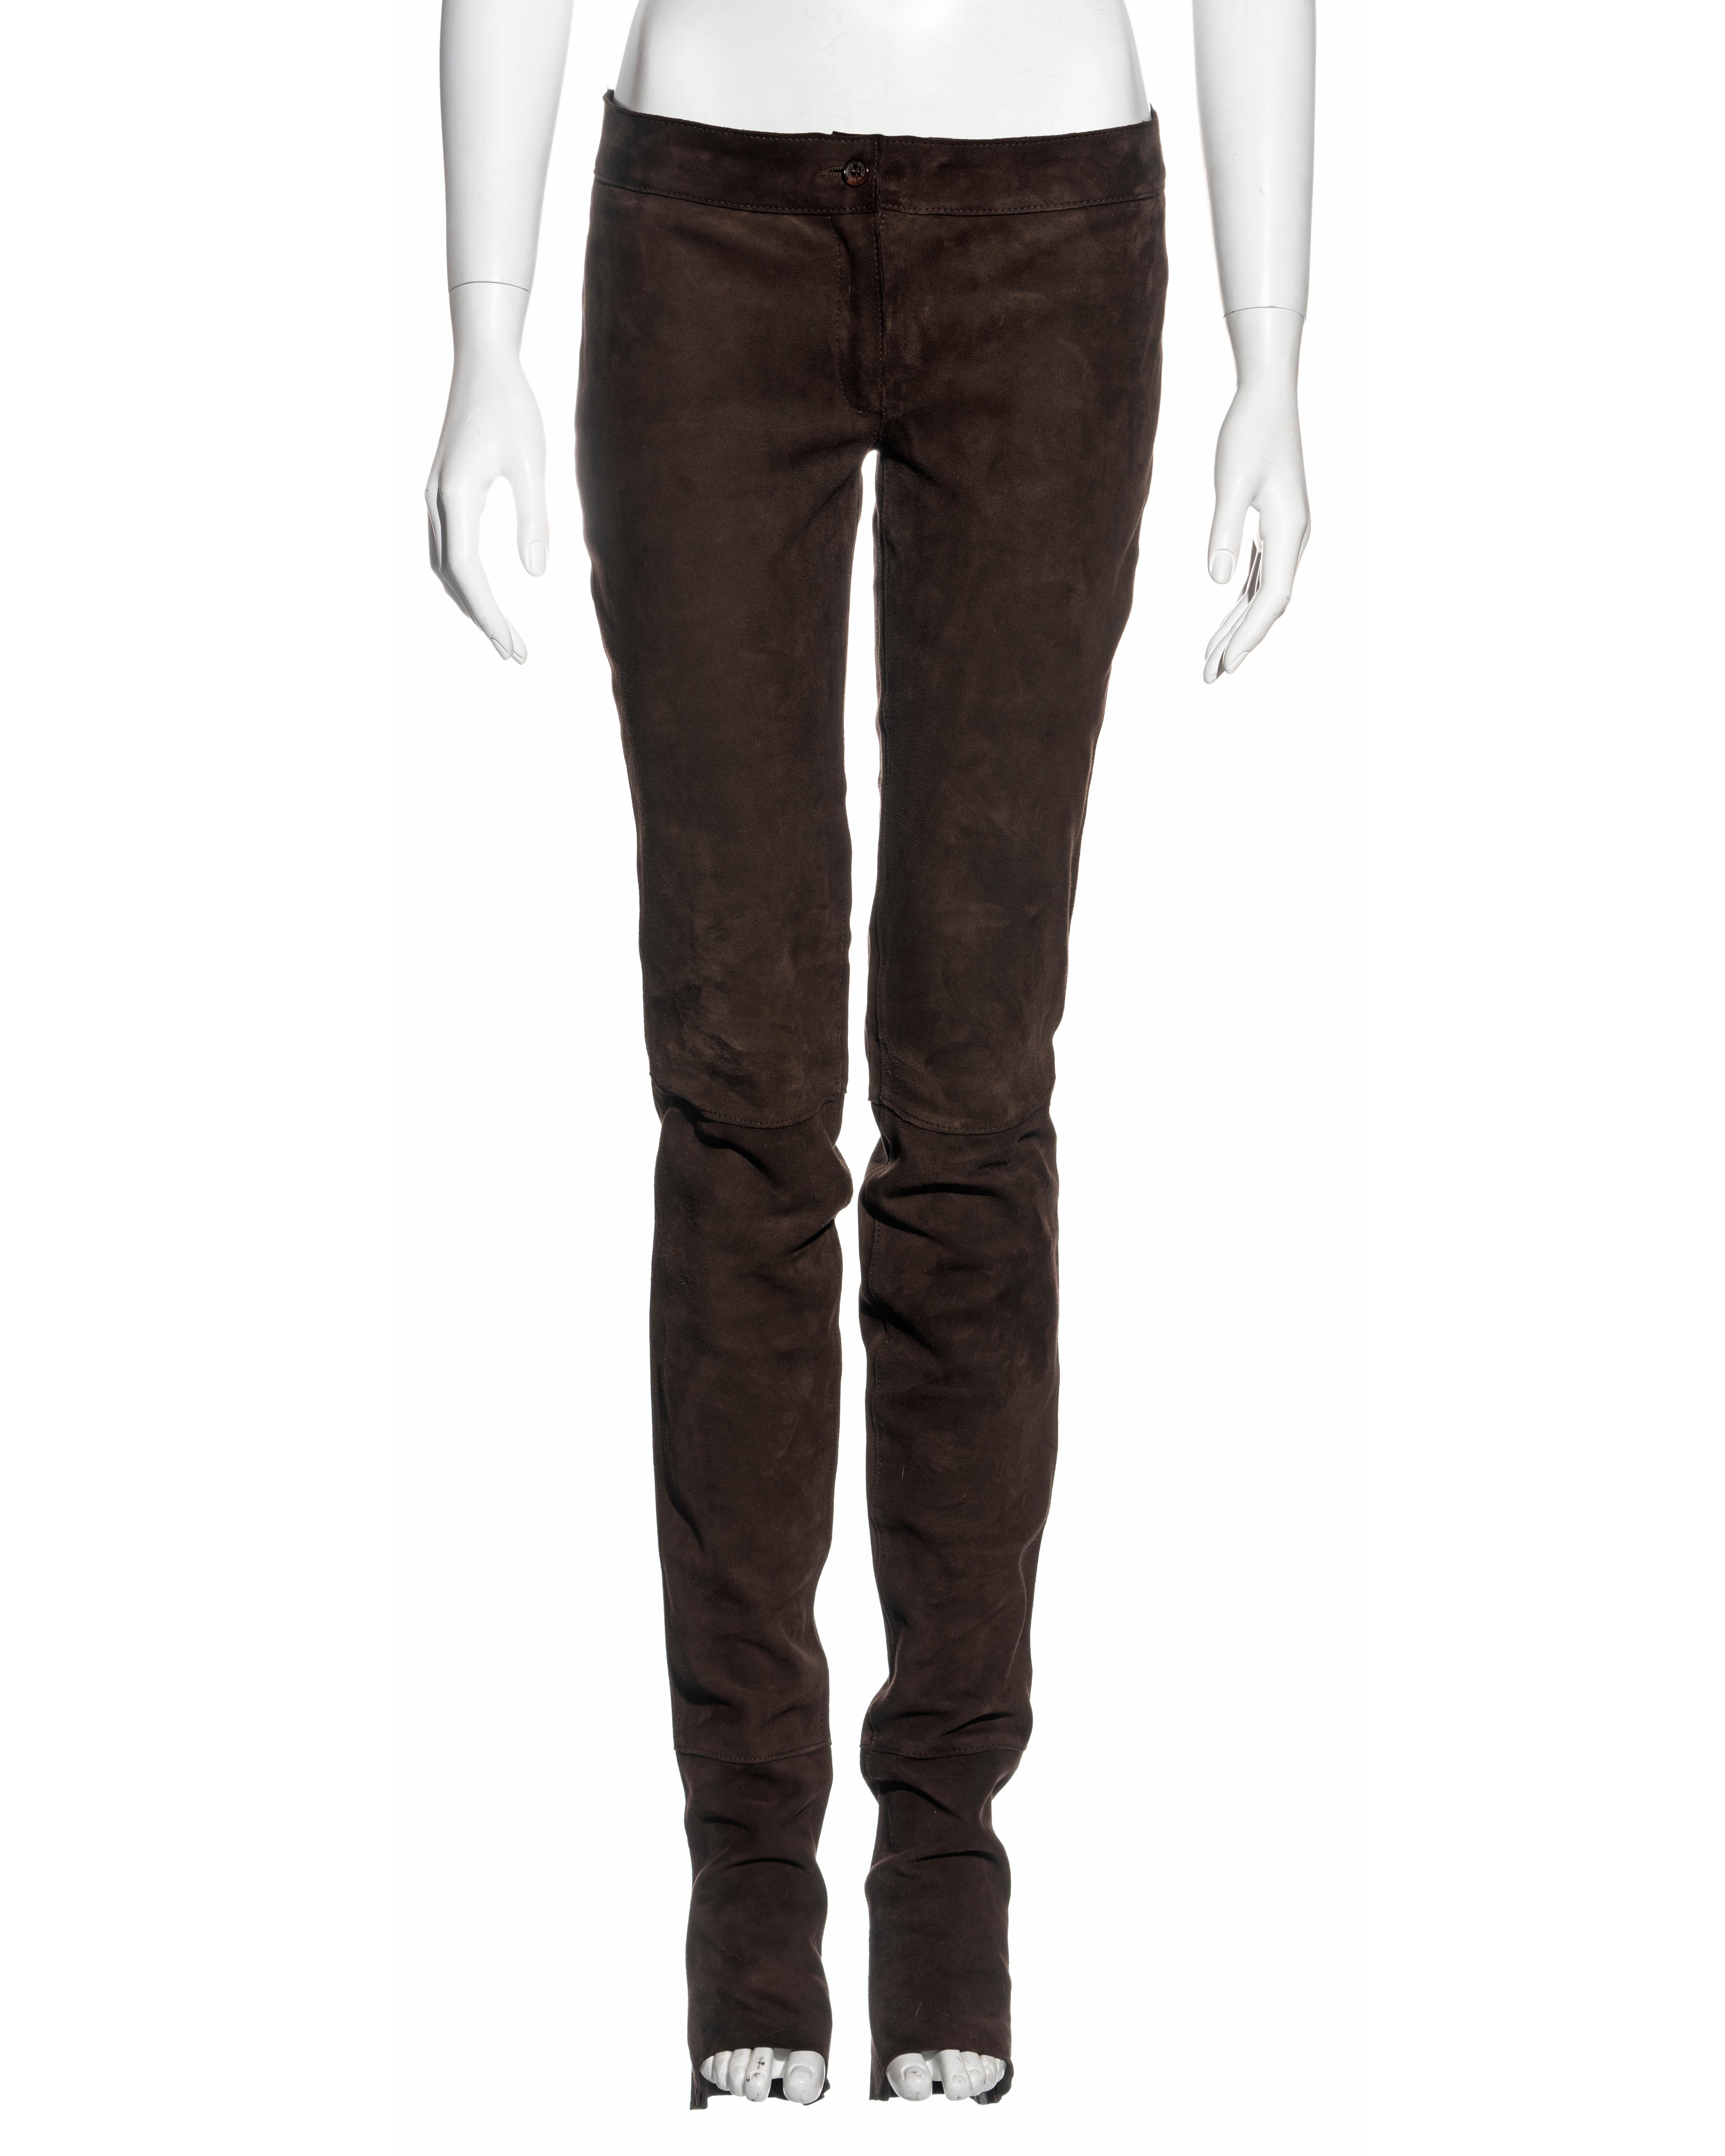 Black Dolce & Gabbana low rise extra long ruched brown leather pants, fw 2001